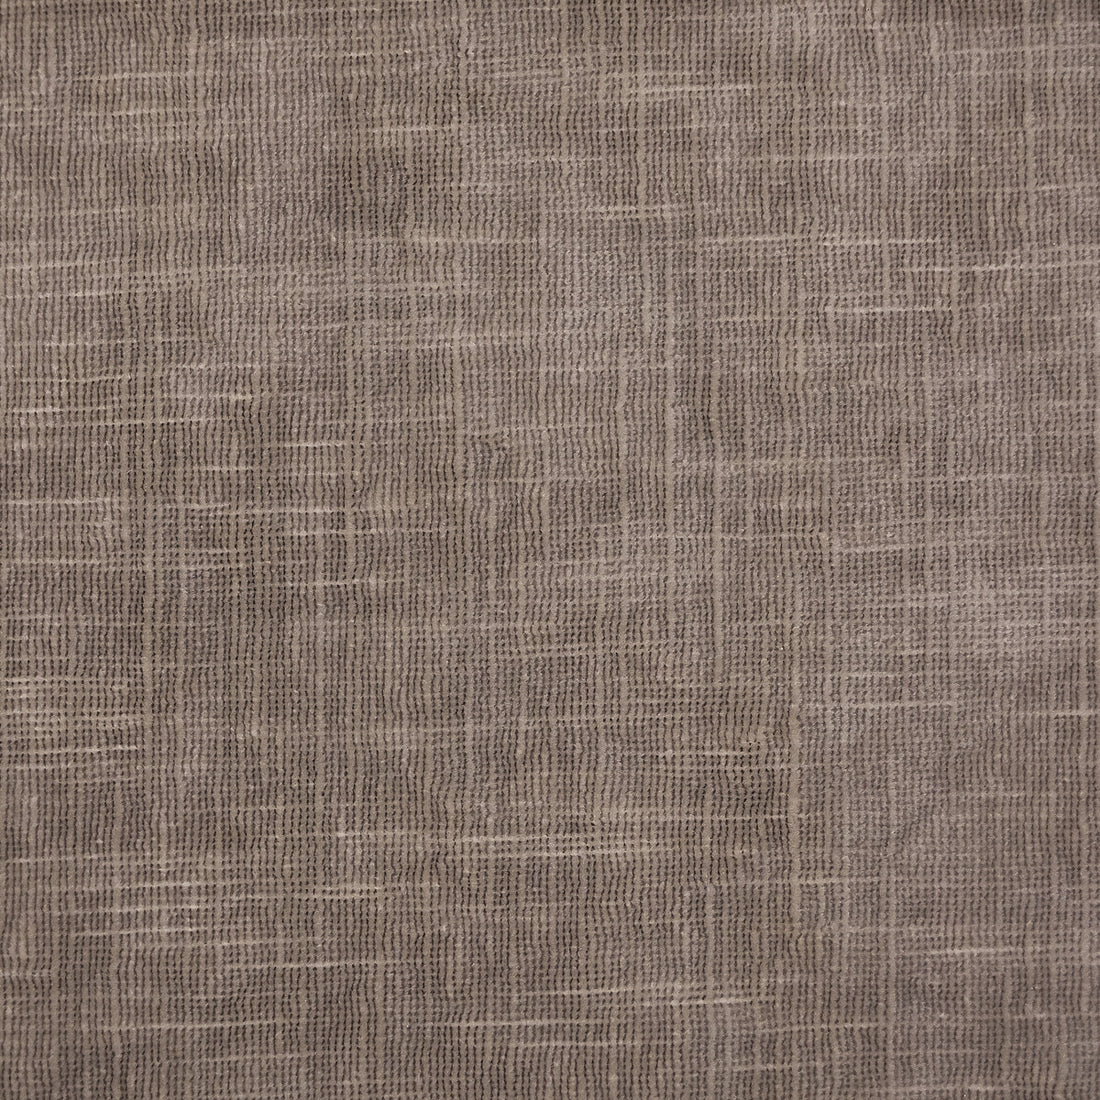 Dandy fabric in 1 color - pattern LZ-30209.01.0 - by Kravet Design in the Lizzo collection